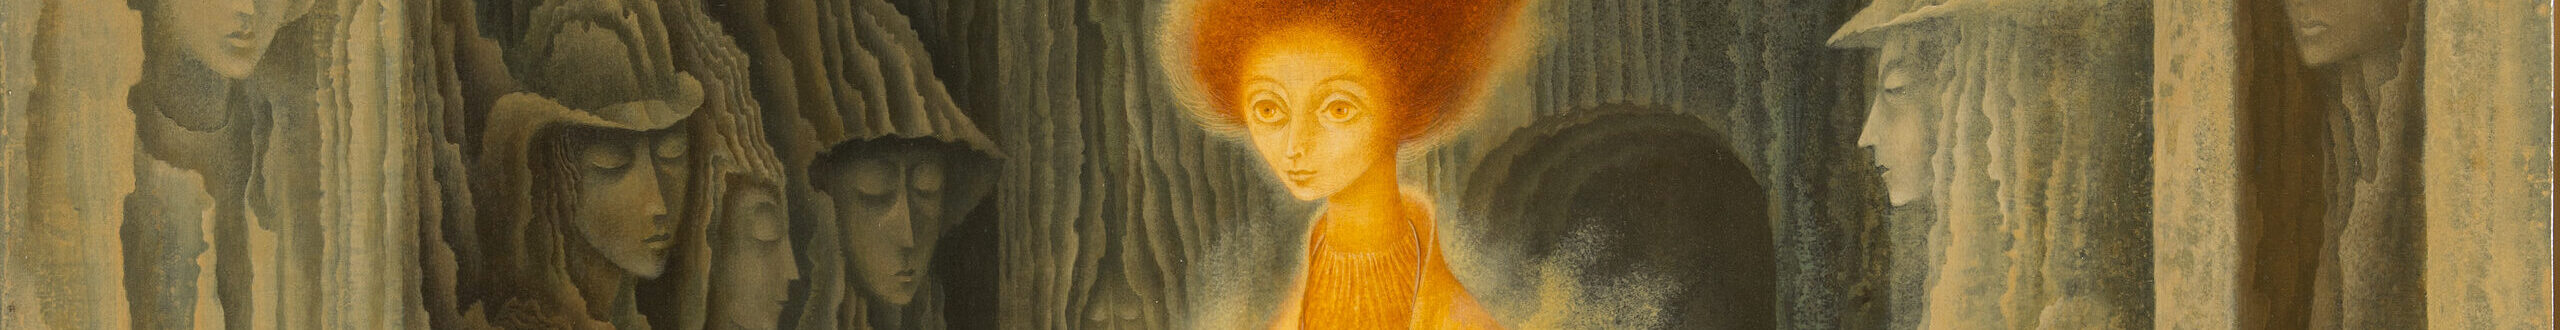 Rendered with precise brushwork, a tall, thin figure strides forward wearing flowing, orange garments emanating a misty golden aura. Her fiery red hair stretches heavenward, encircling a celestial orb. Figures appear encased in the walls of the concave structure surrounding her.